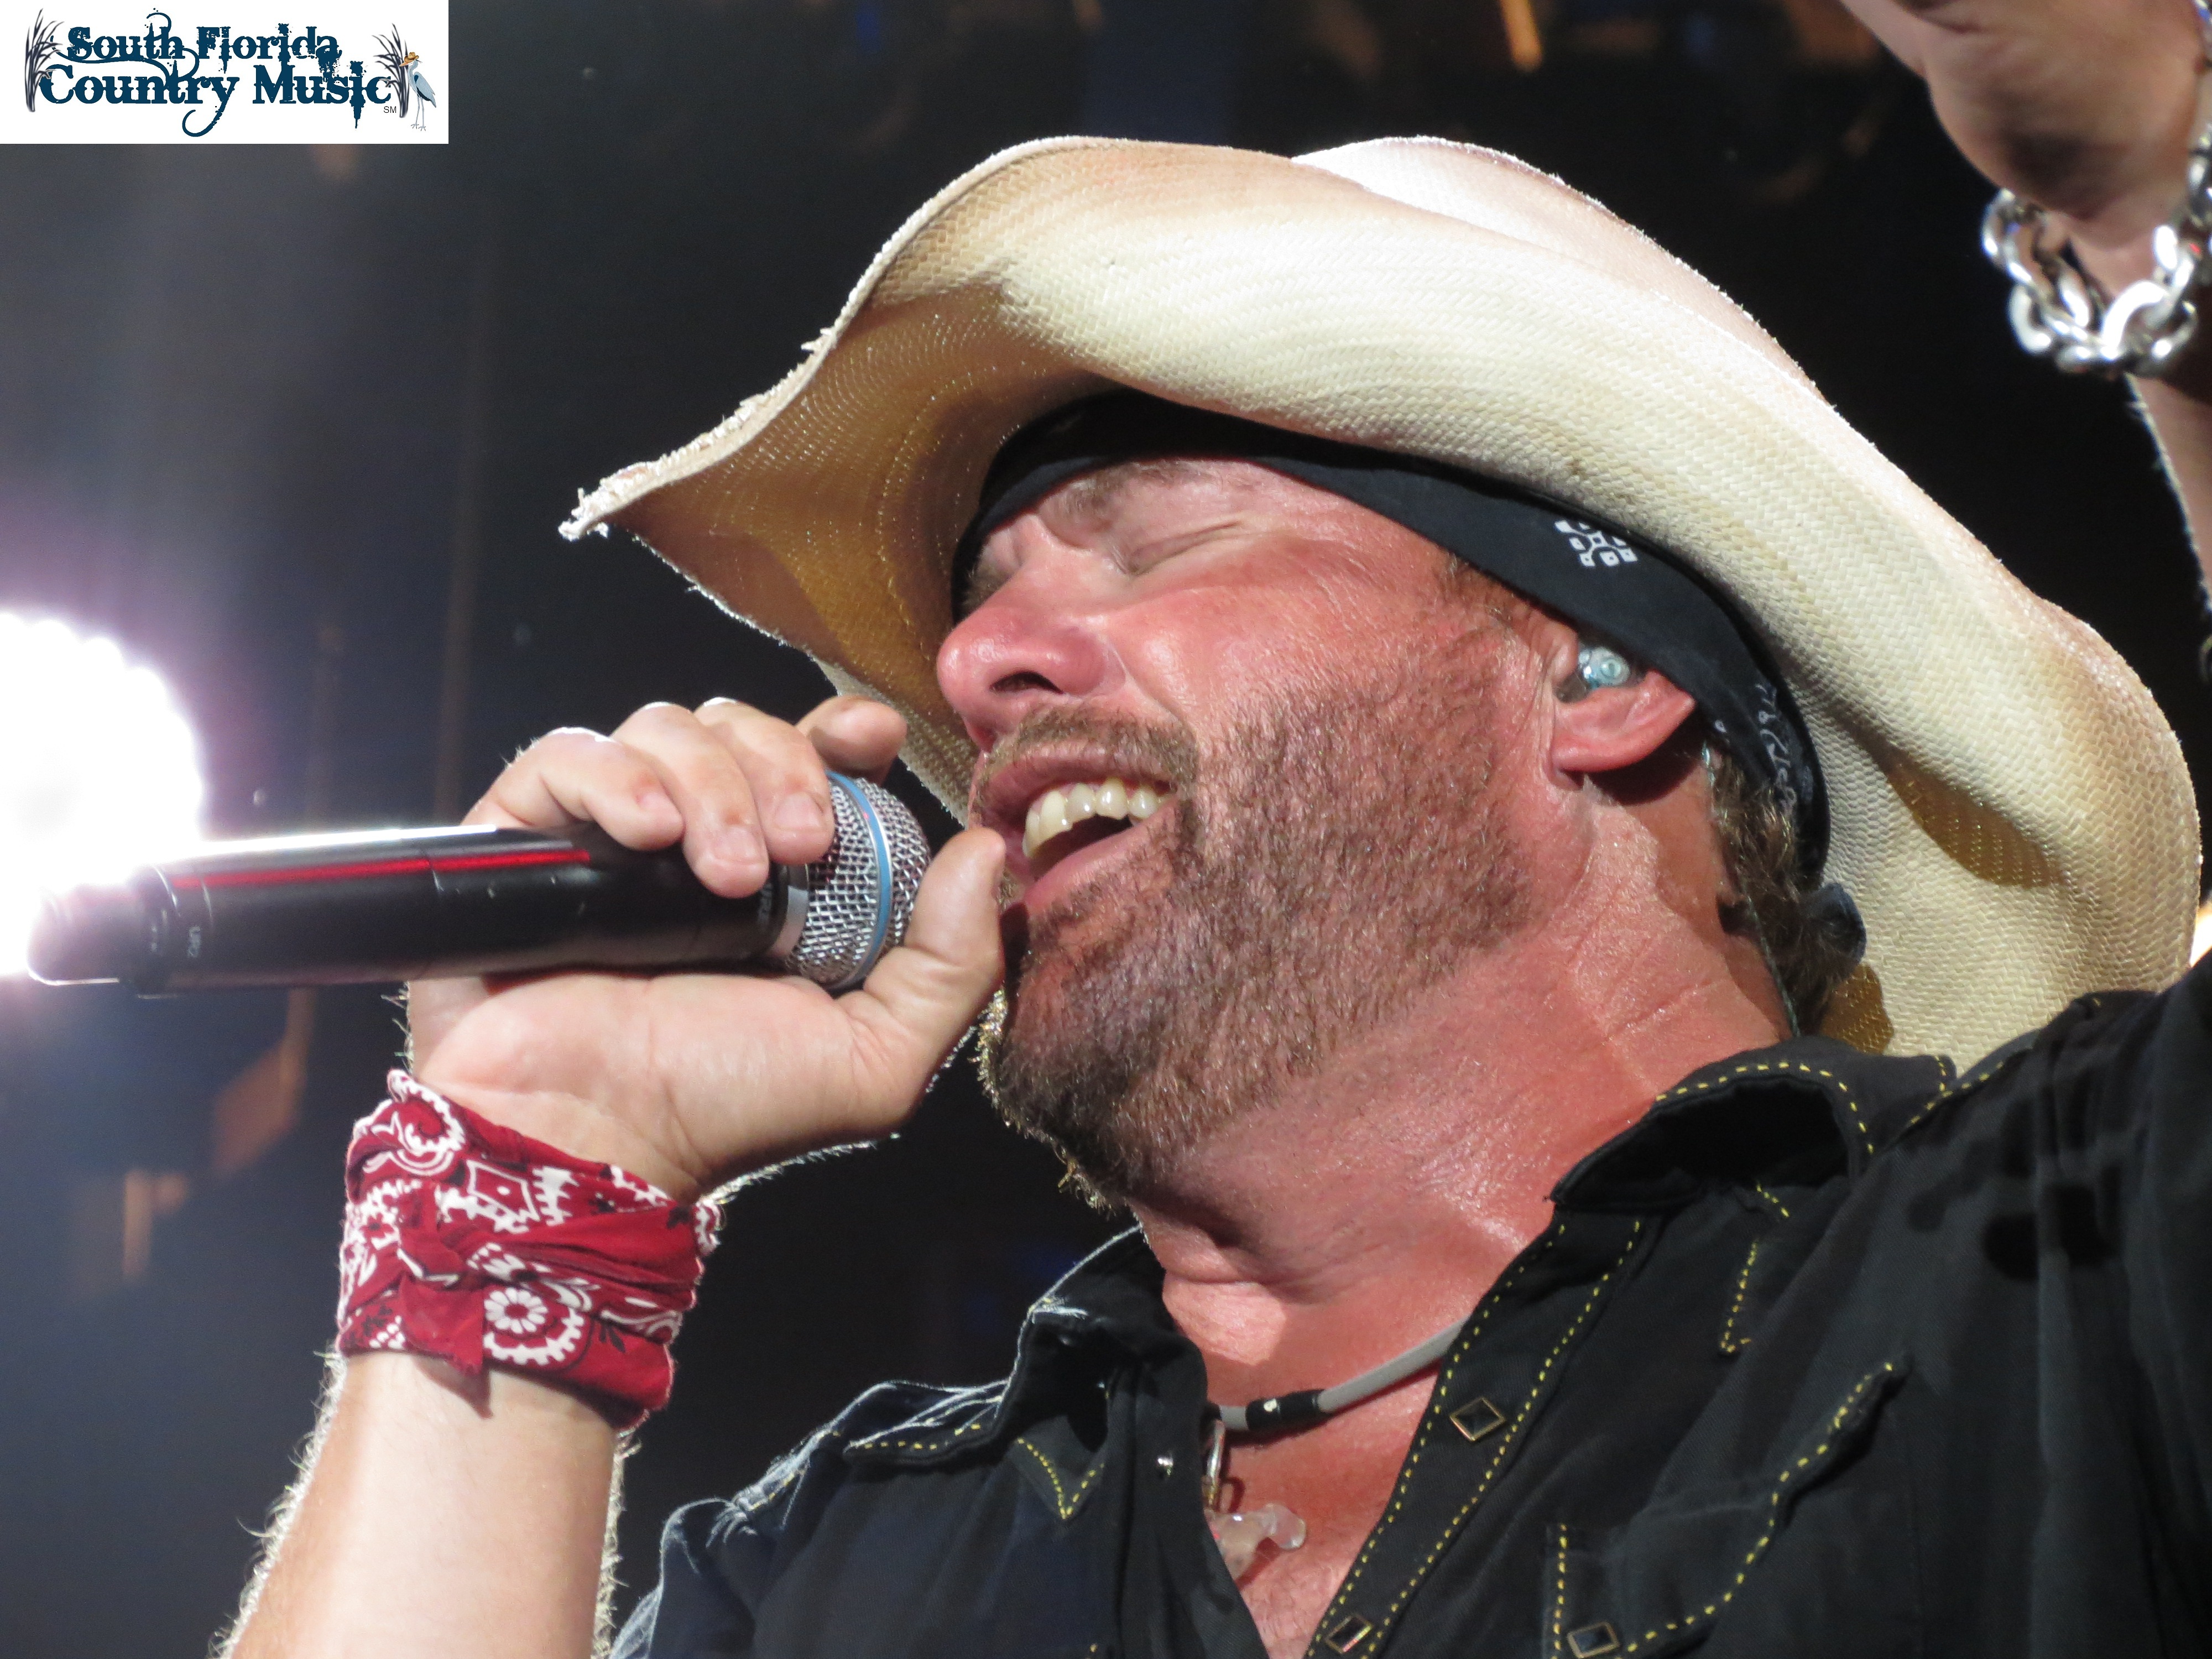 Toby Keith Hometown Country Music